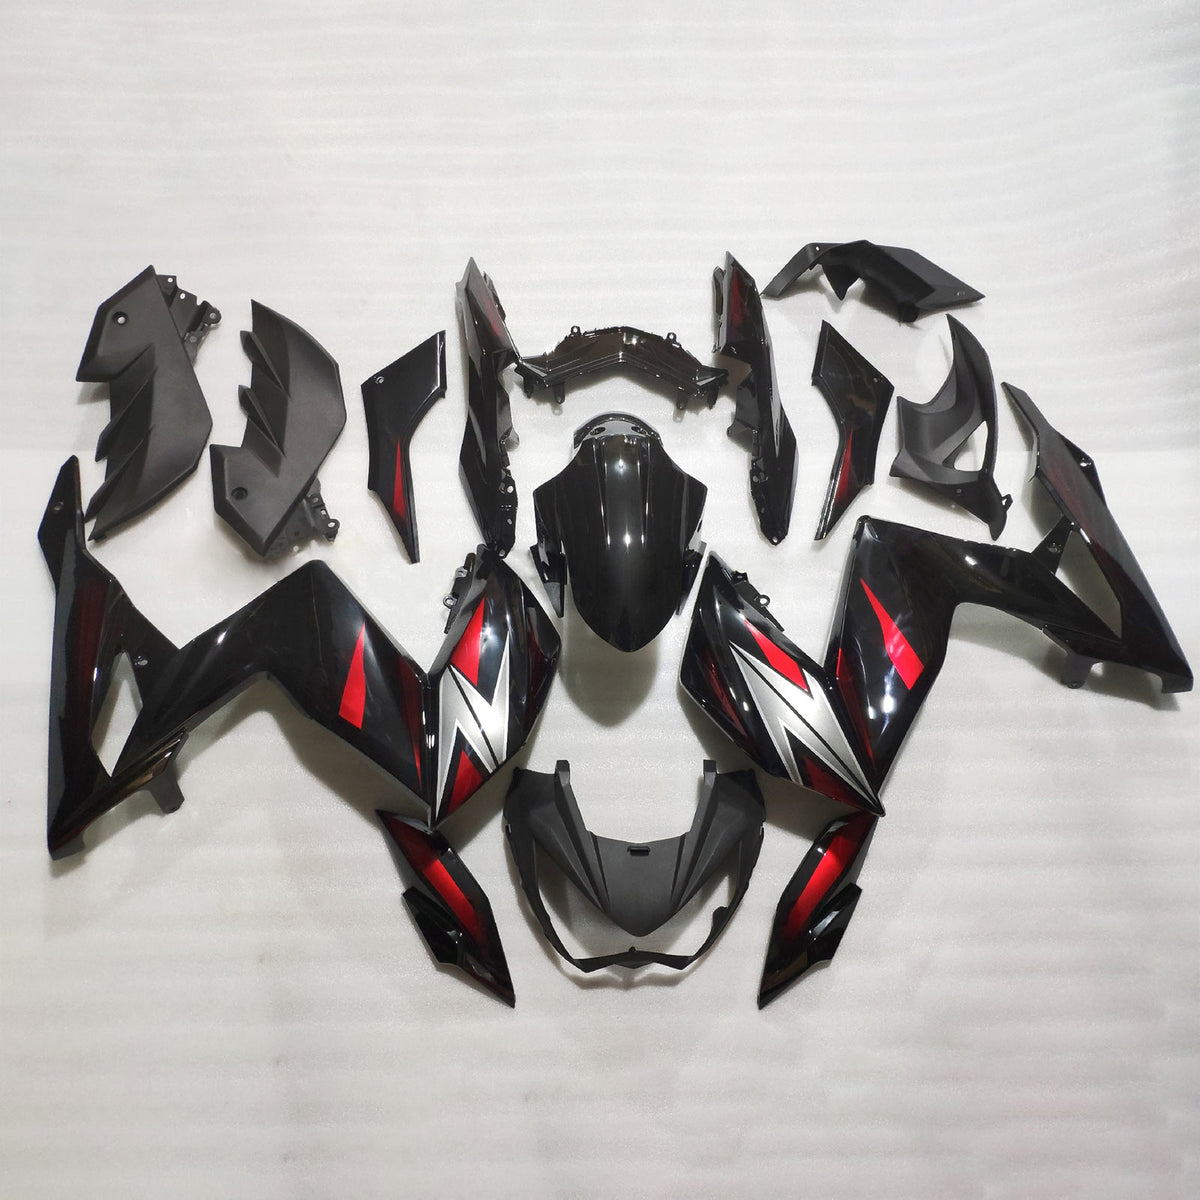 Amotopart 2015-2016 Z250 Z300 Kawasaki Black with Red Accent Fairing Kit